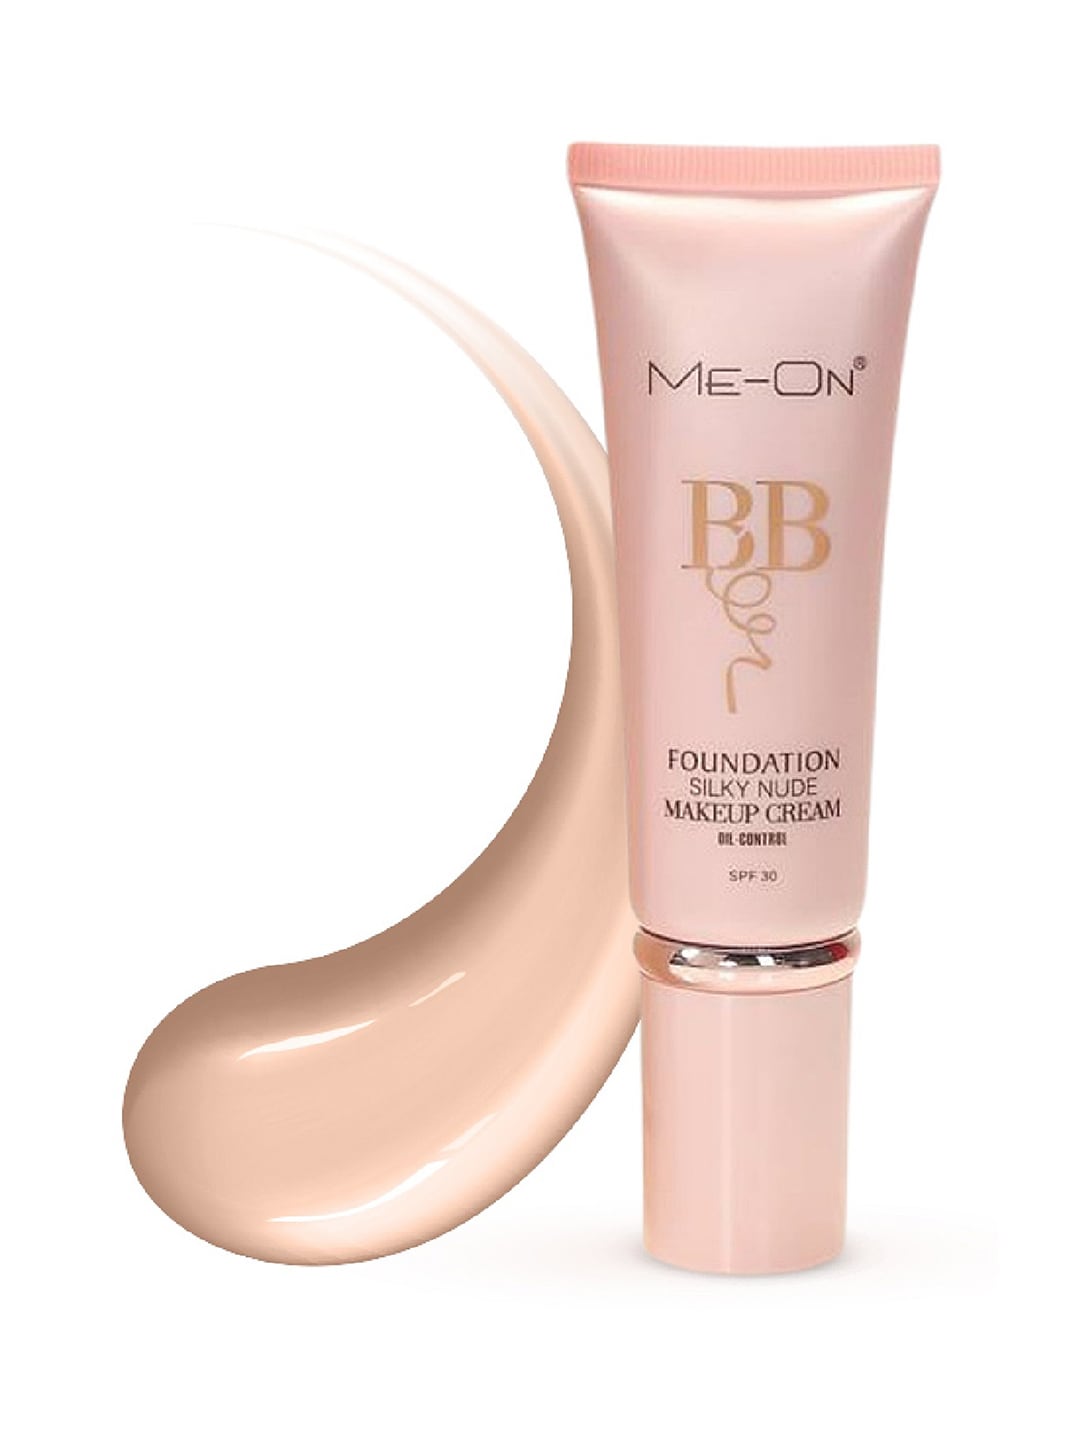 ME-ON Oil Control BB Cream Foundation- Shade 23 Price in India